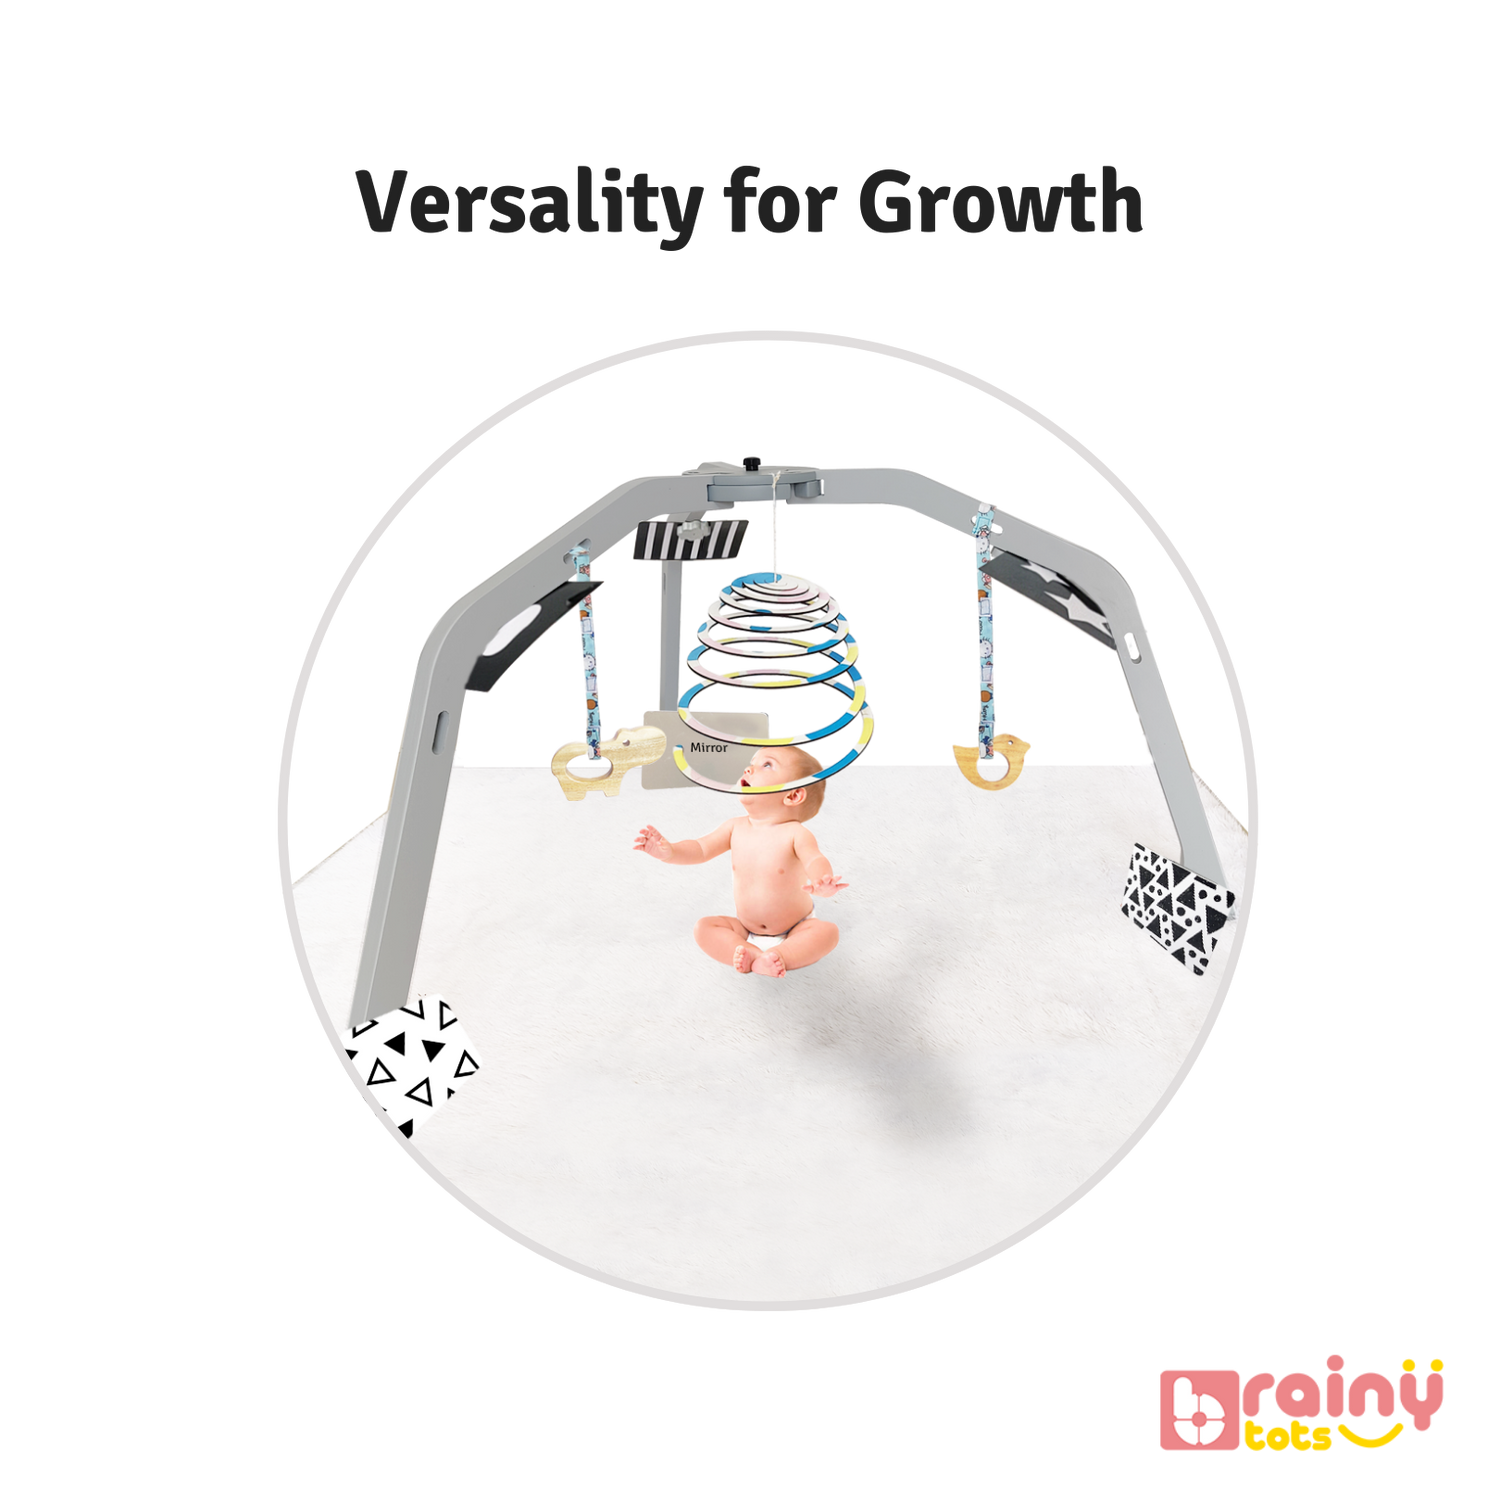 Accommodating lying down and sitting up positions for infants. This Montessori wooden play gym, ideal for babies aged 0-12 months, enhances sensory development with varied textures and interactive elements. Safe, sturdy, and engaging for early learning and exploration.